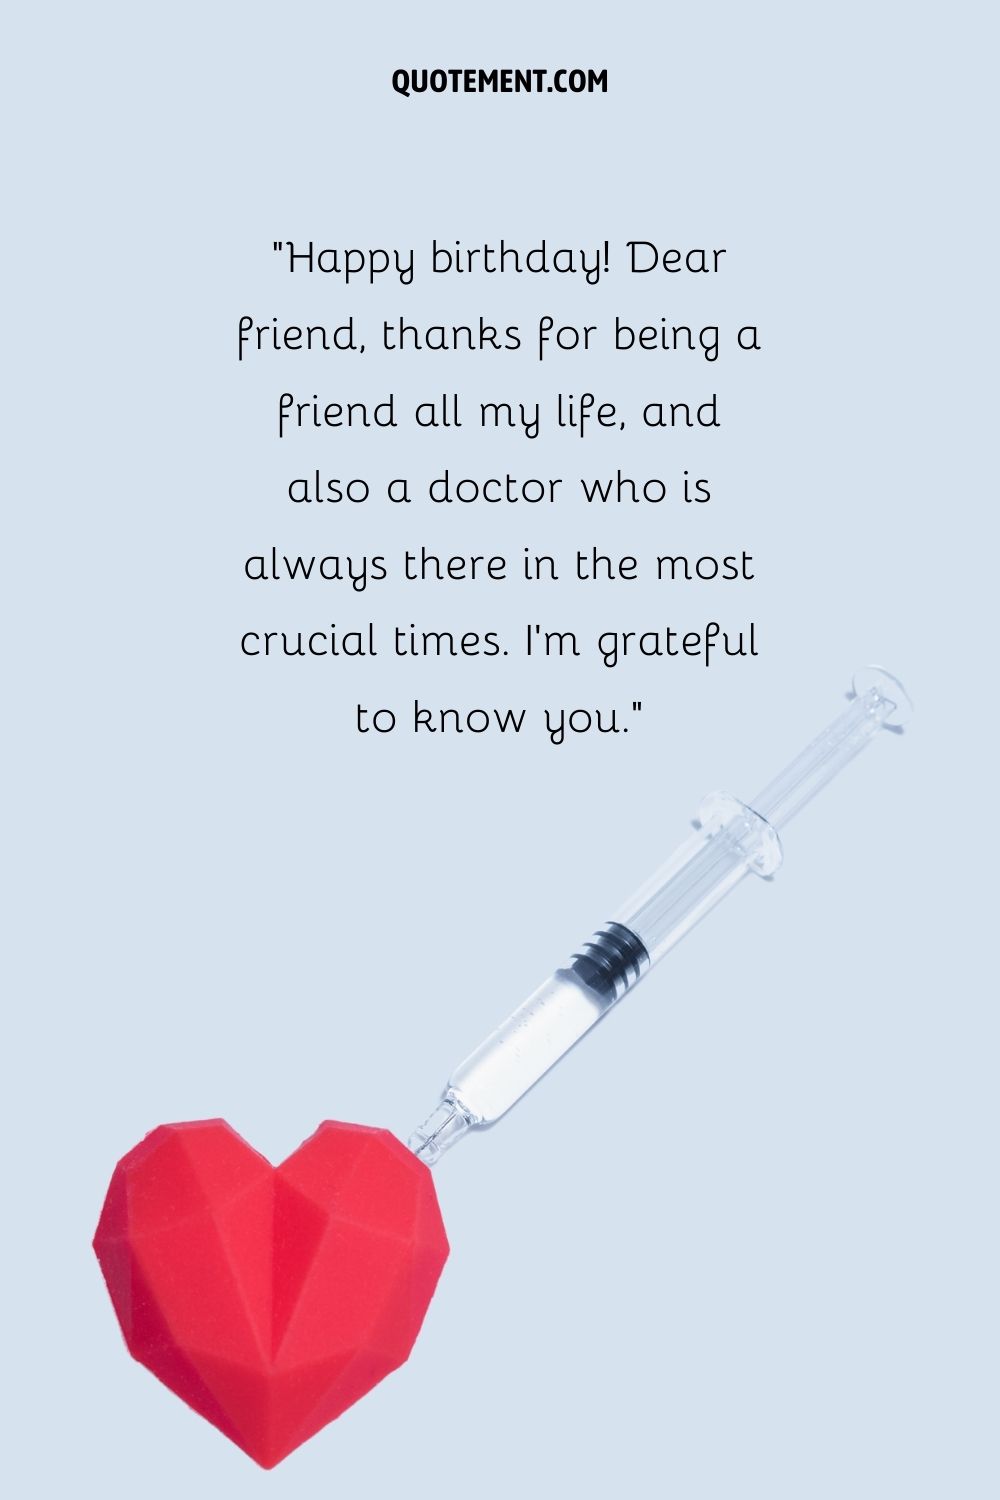 quote about friend who is a doctor representing dr happy birthday wish